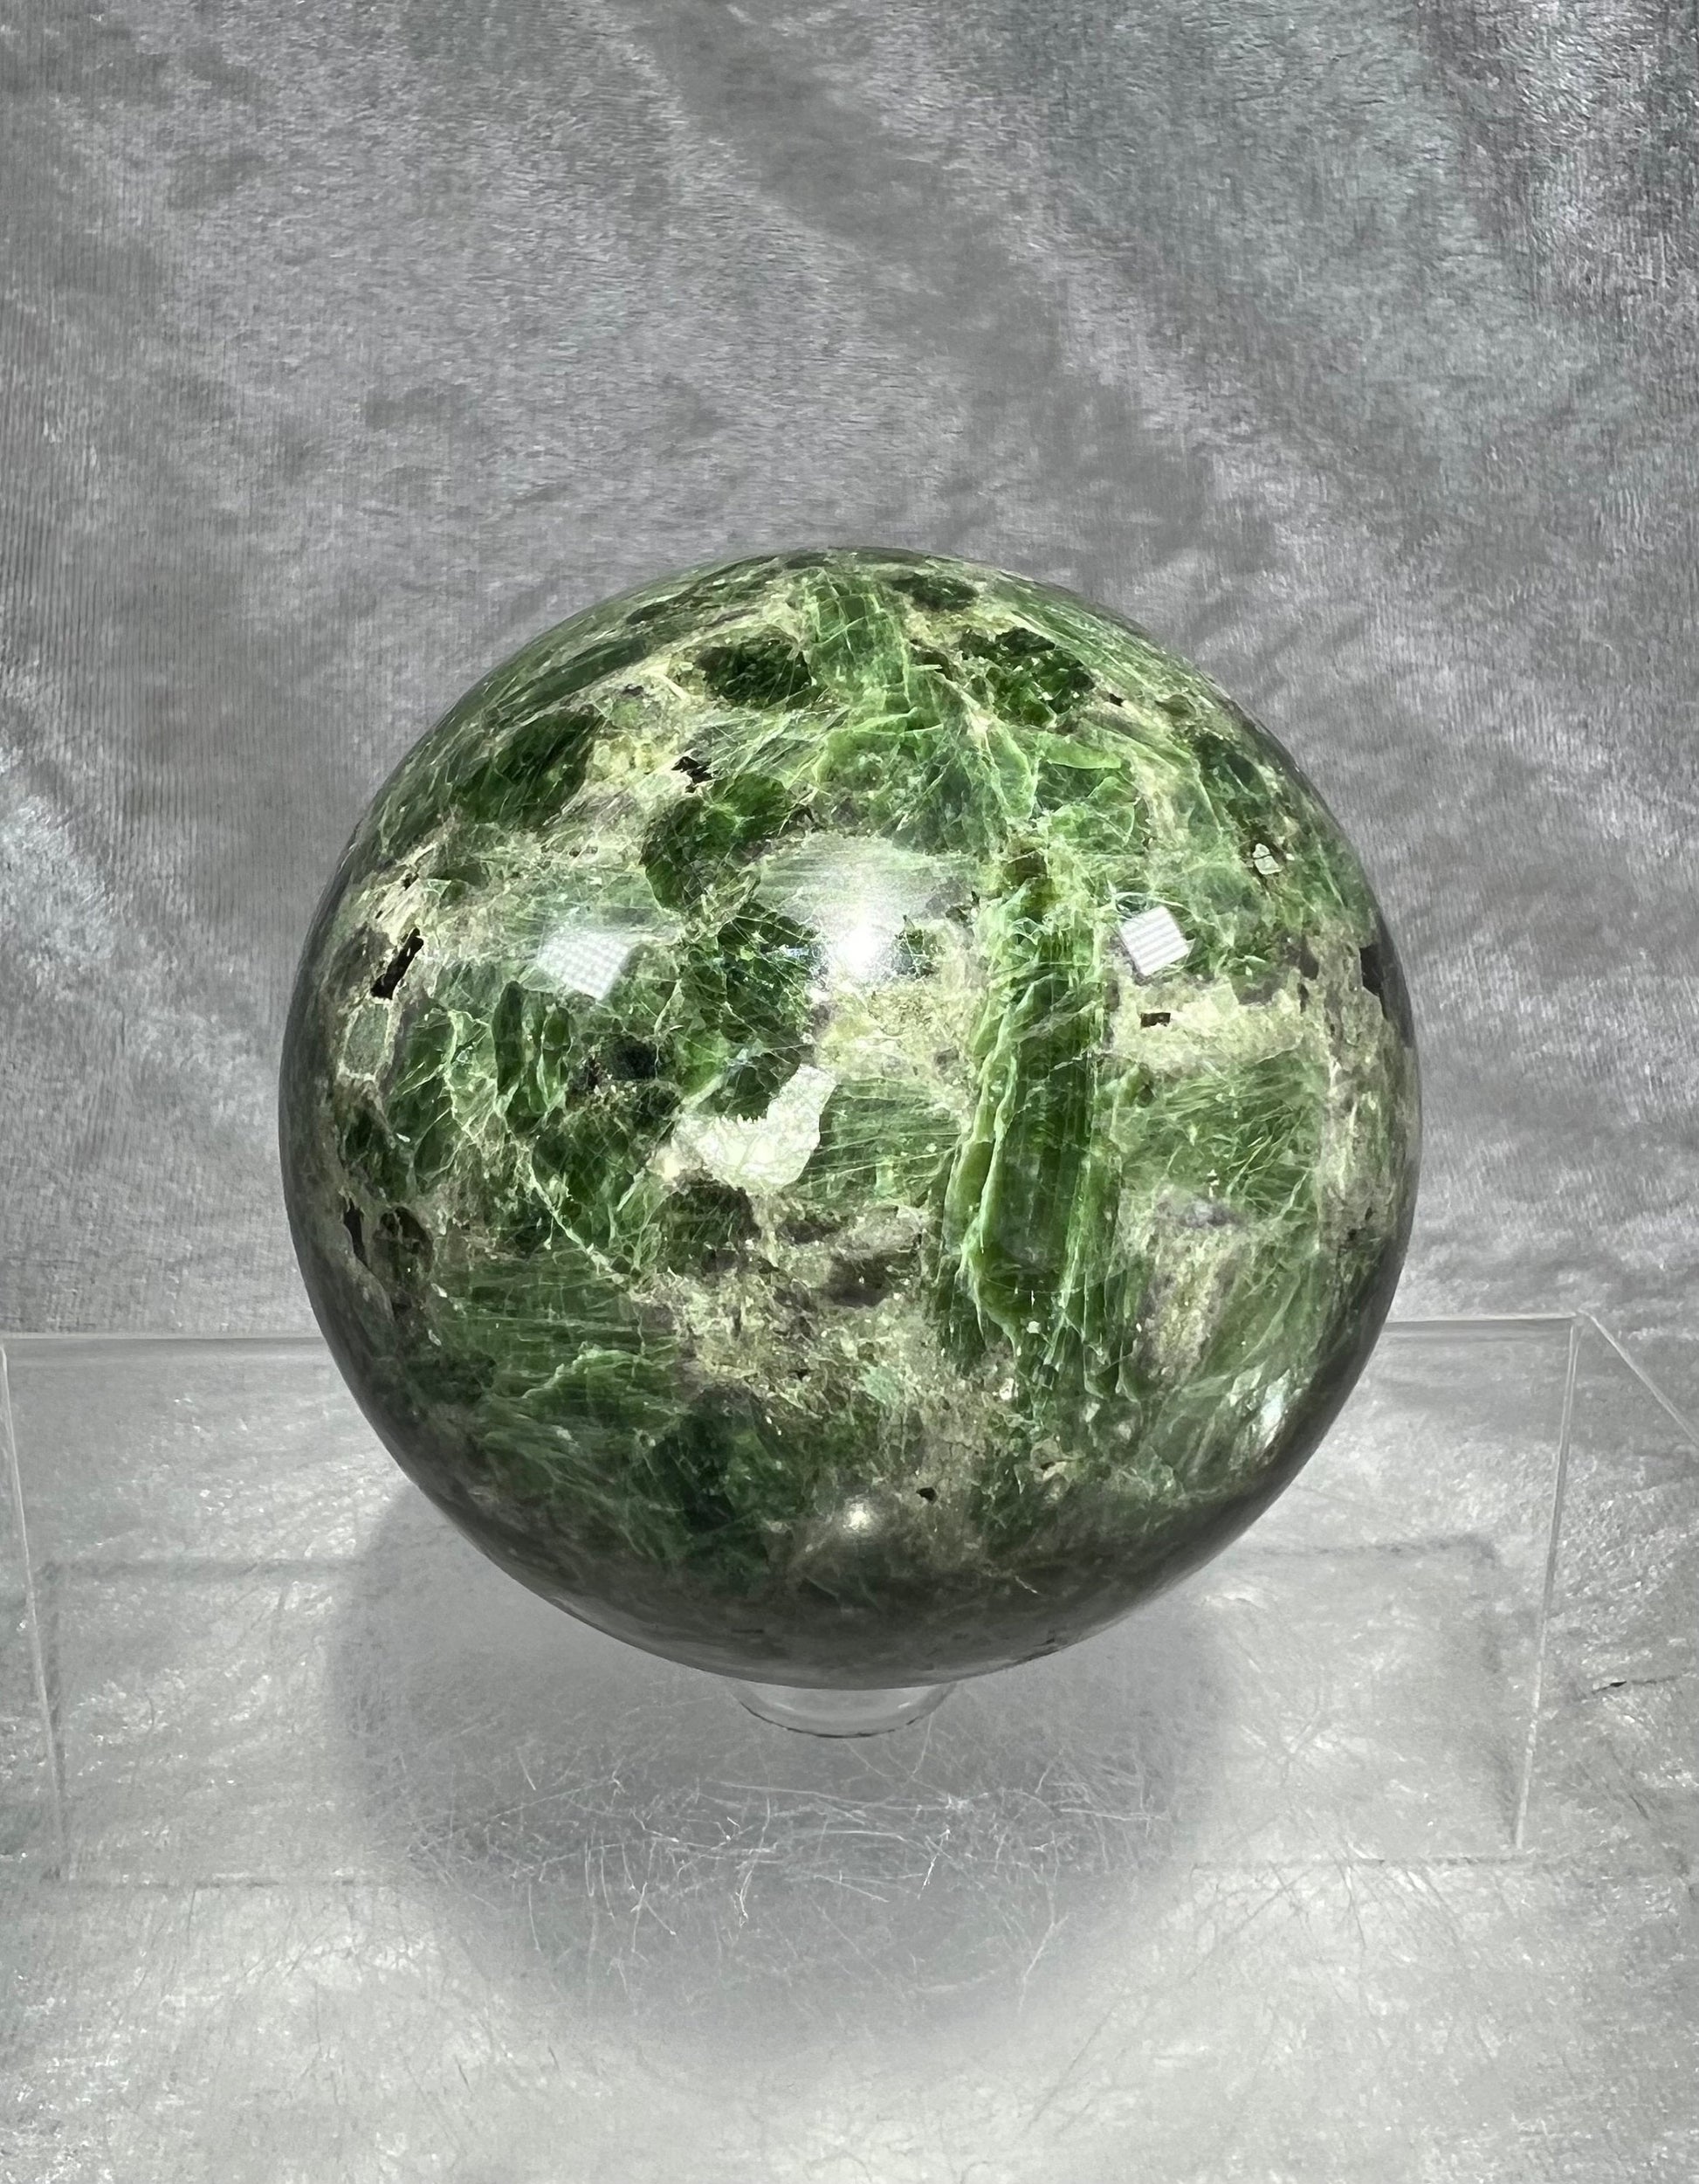 Incredible Diopside Crystal Sphere. 70mm. Very Rare And High Quality Sphere. Loaded With Tons Of Flash!